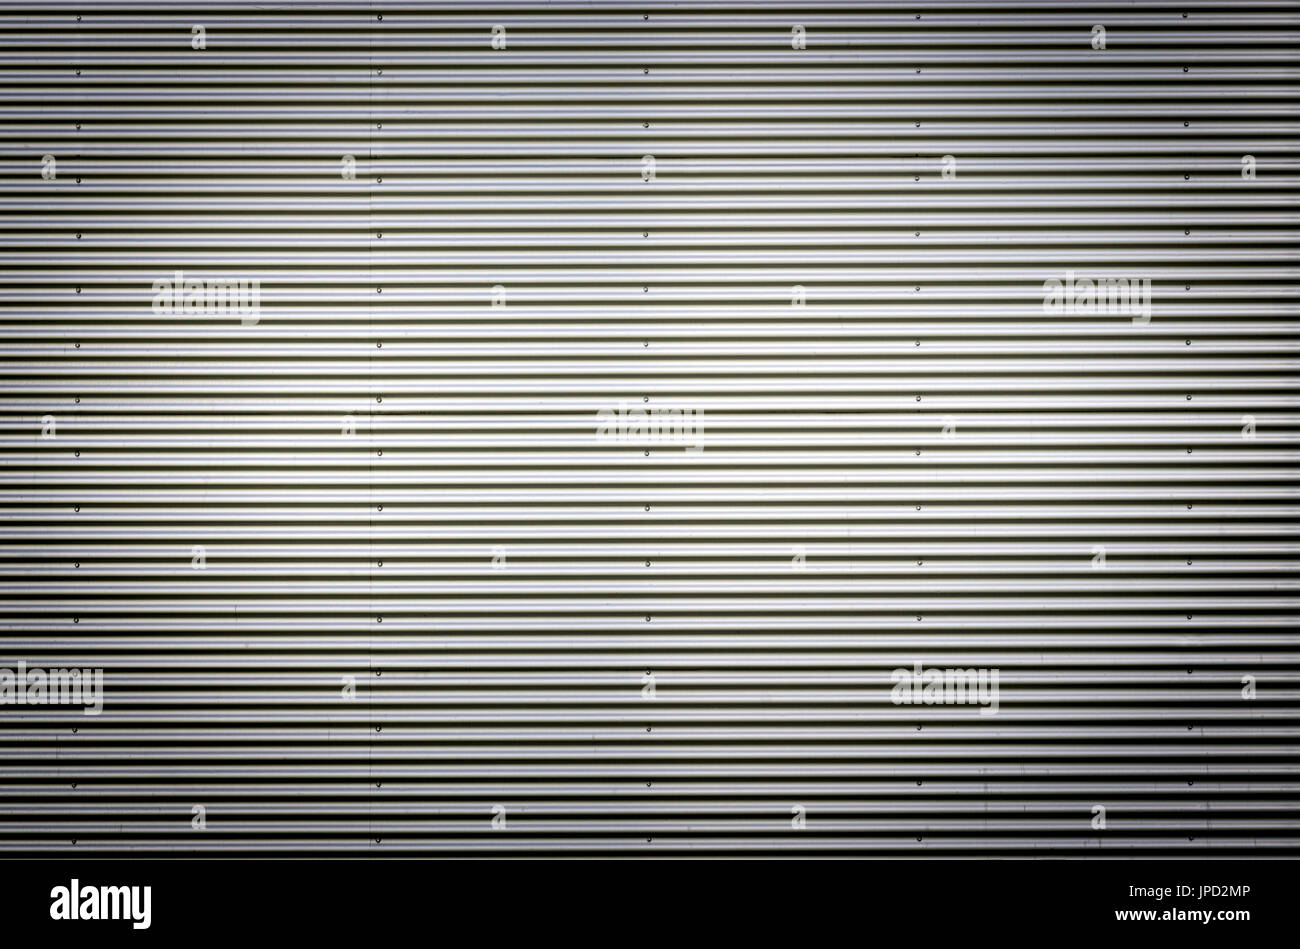 Corrugated metal sheet. Silver gray background pattern with nice vignetting. Stock Photo